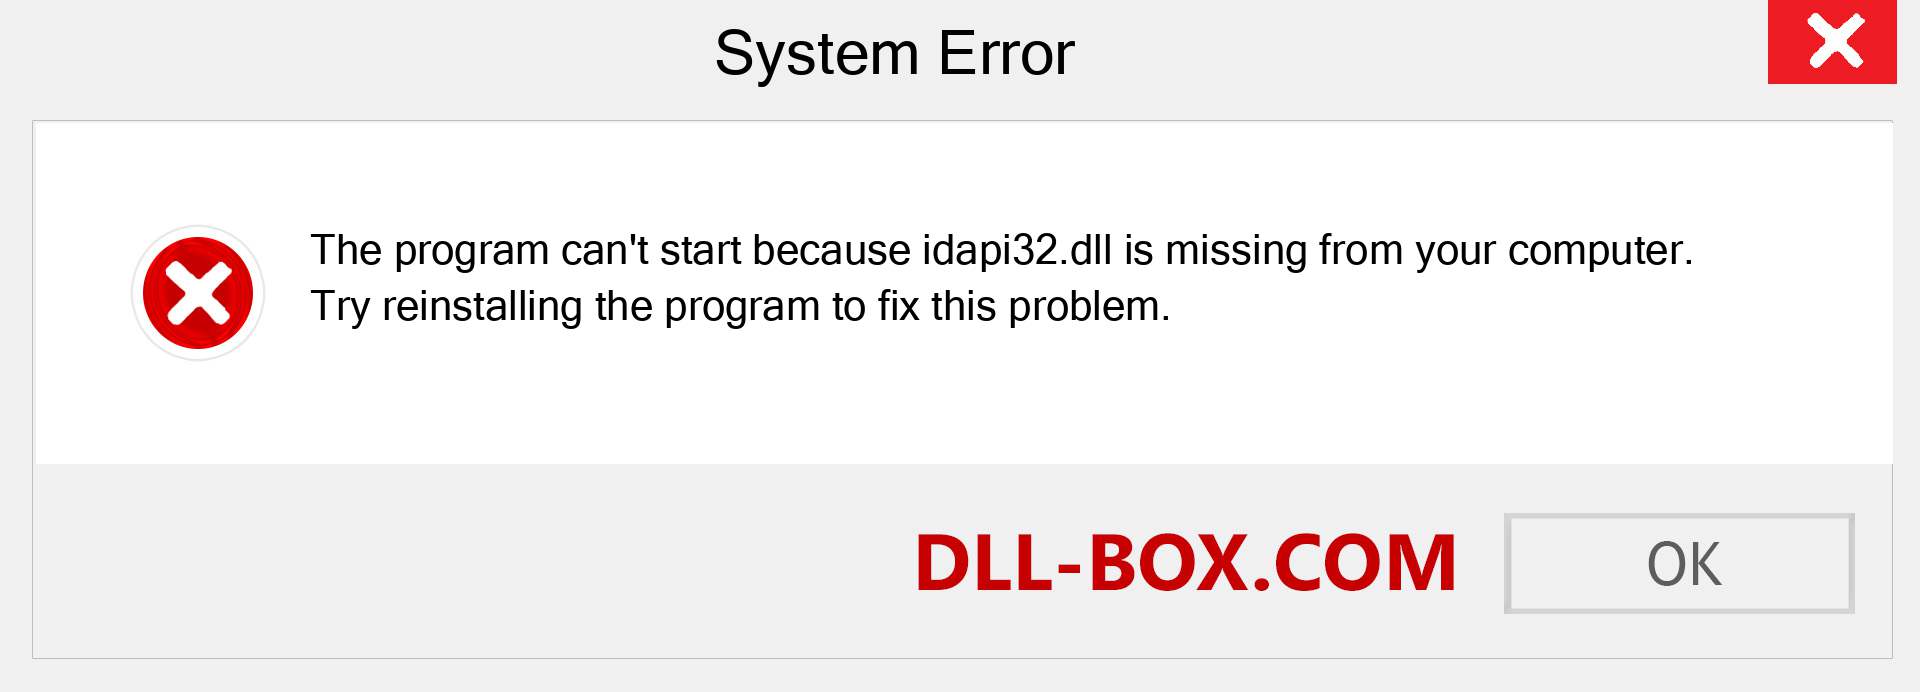  idapi32.dll file is missing?. Download for Windows 7, 8, 10 - Fix  idapi32 dll Missing Error on Windows, photos, images